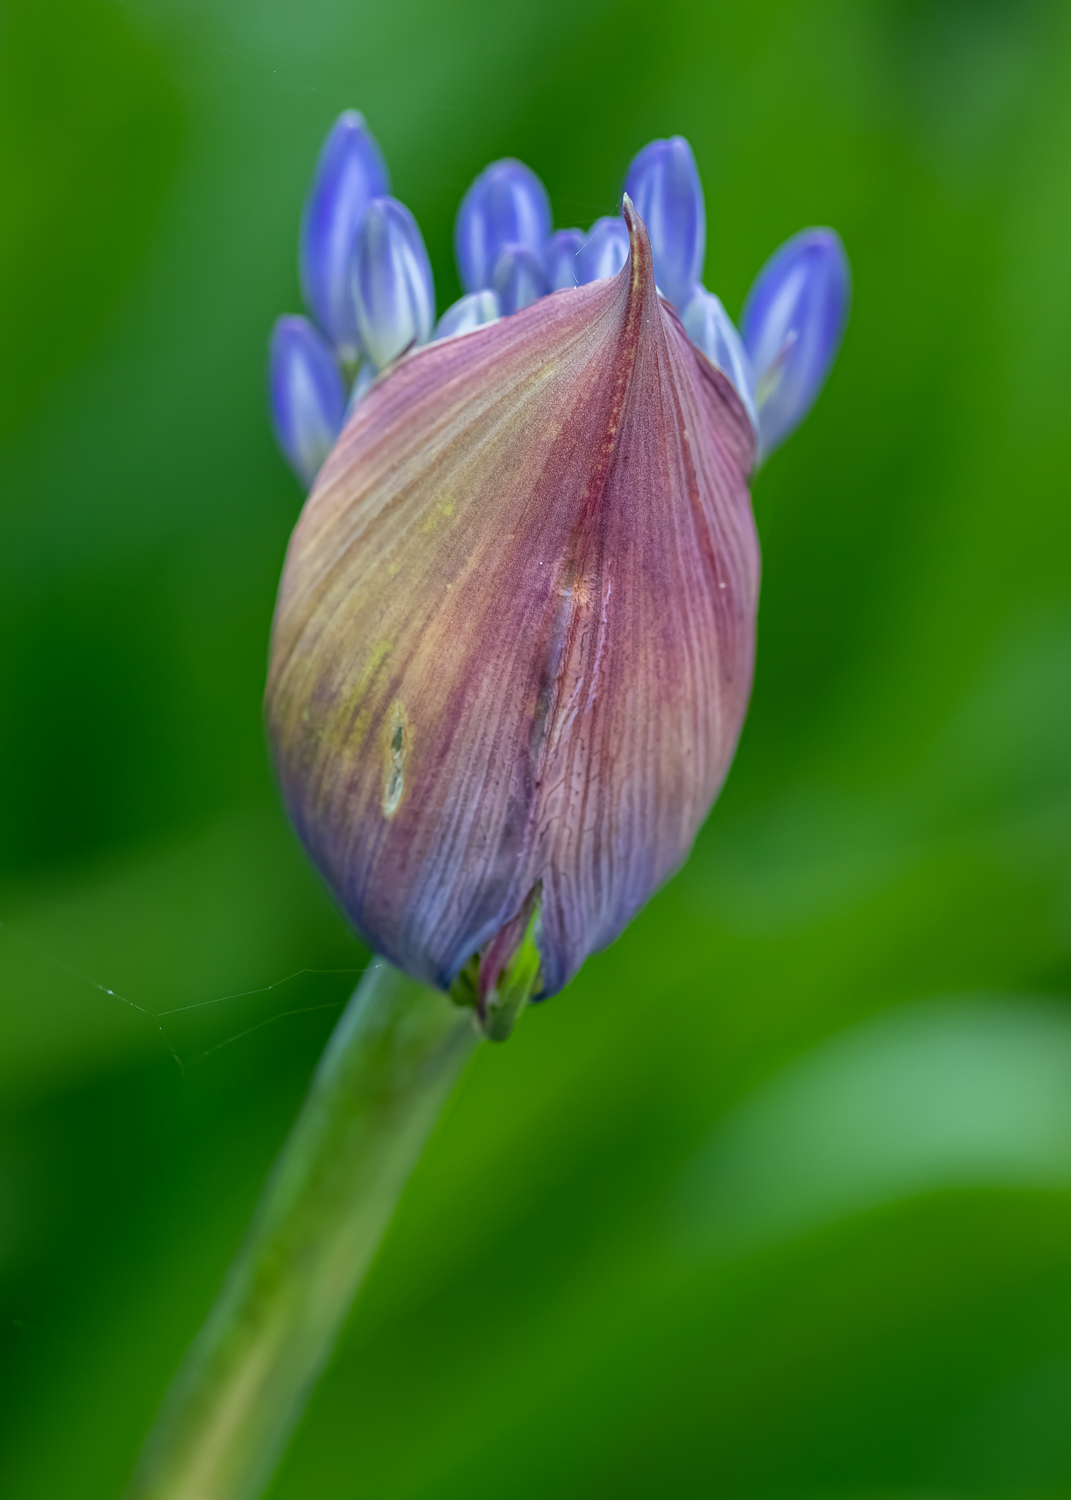 A purple agapanthus flower bursting out from the bud against a green leafy background